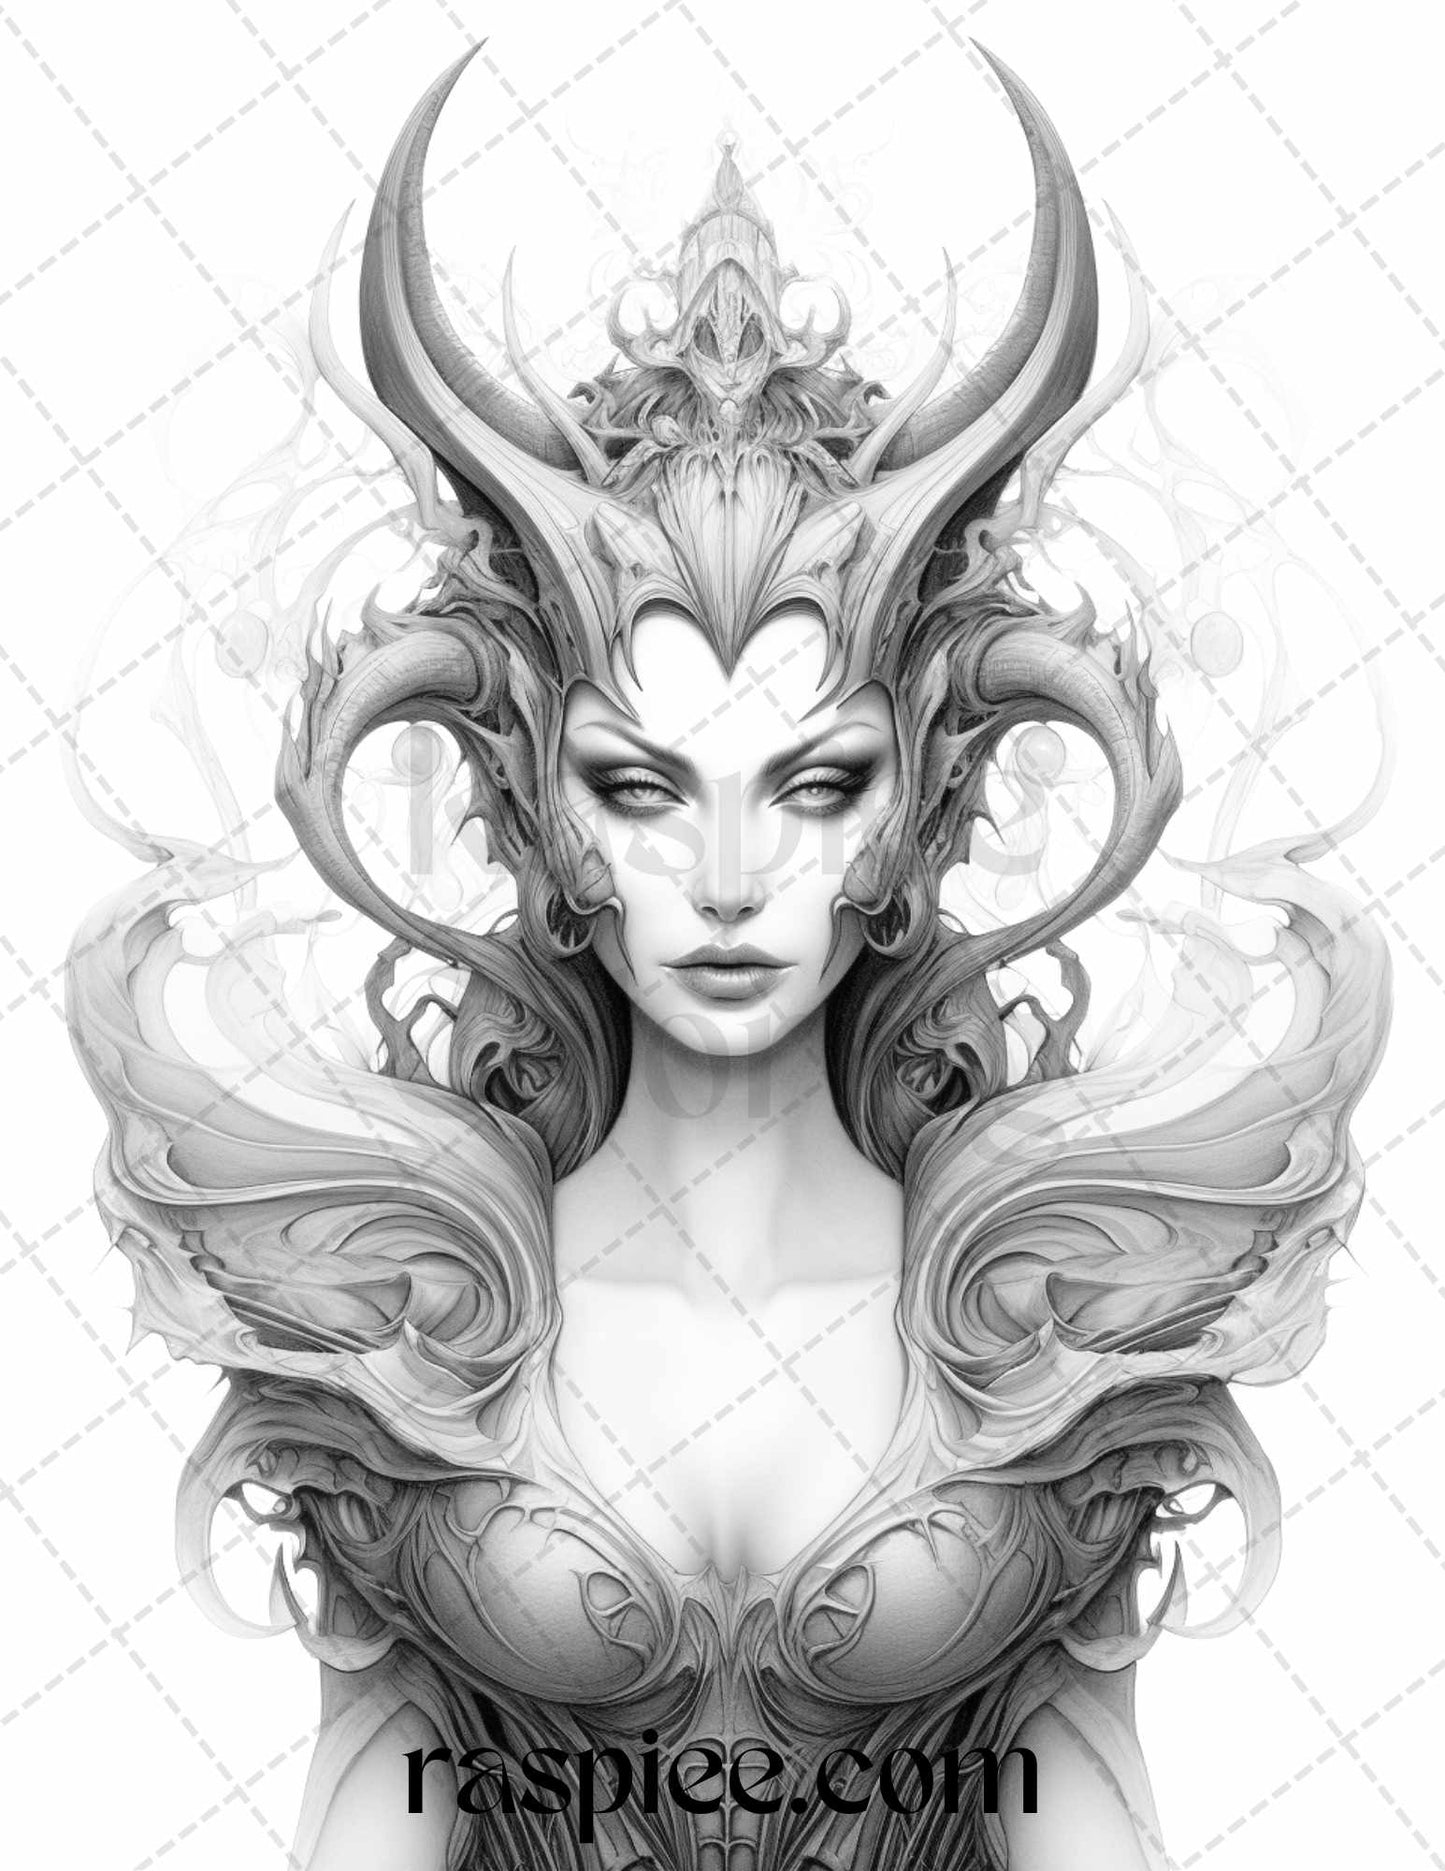 40 Dark Evil Fairy Grayscale Coloring Pages Printable for Adults, PDF File Instant Download